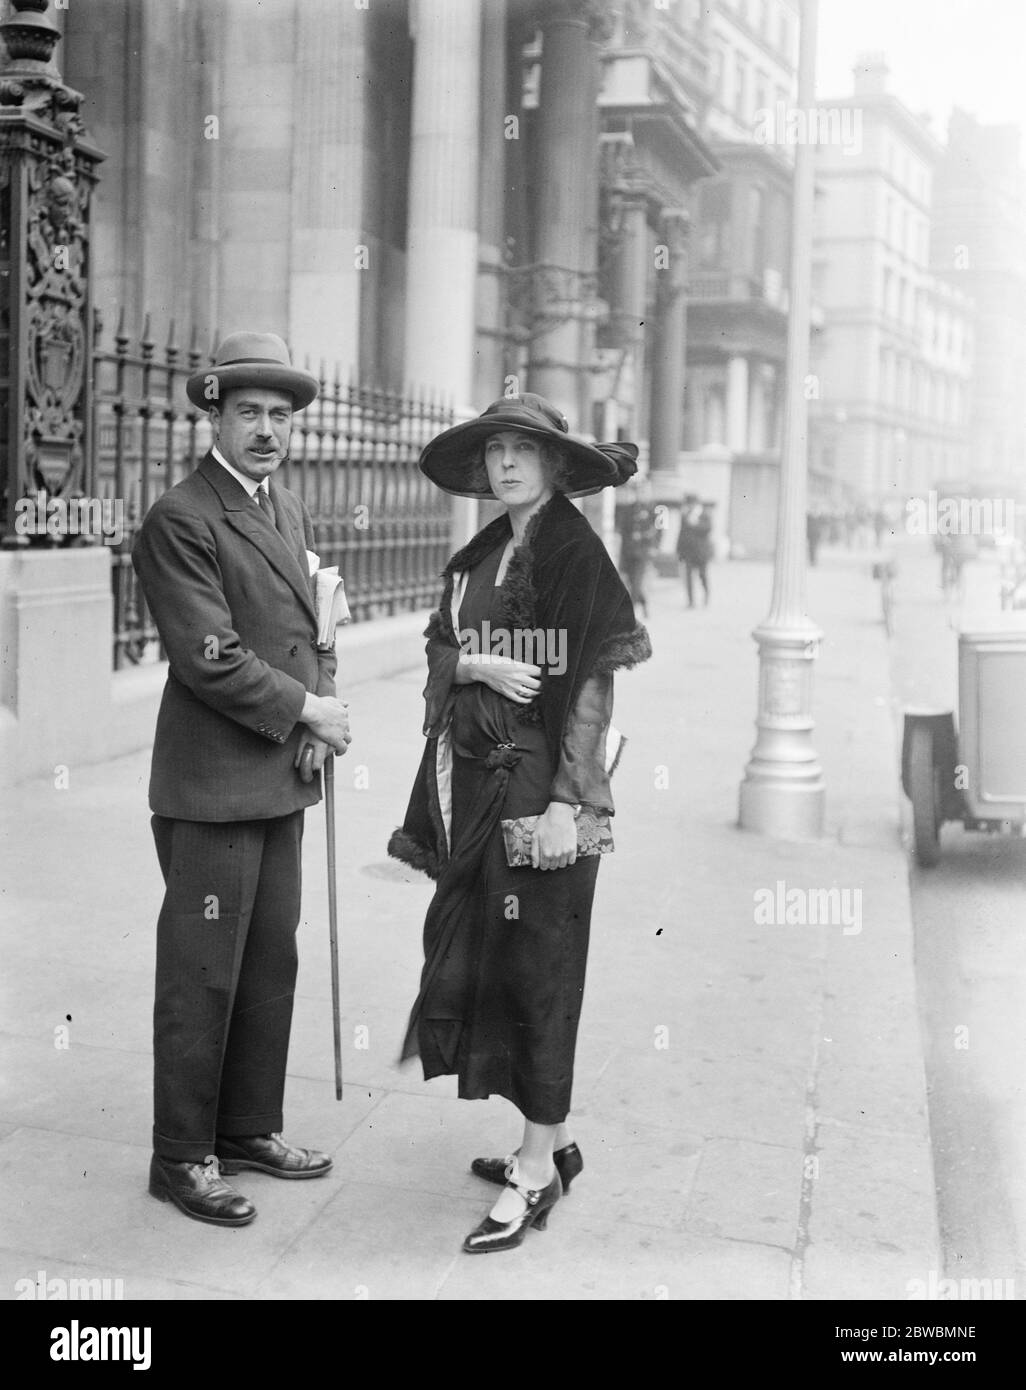 A former Ambassador 's daughter . Miss Meril Buchanan photographed in London . She is the daughter of Sir George Buchanan , the former British Ambassador to Russia . 17 September 1923 Stock Photo